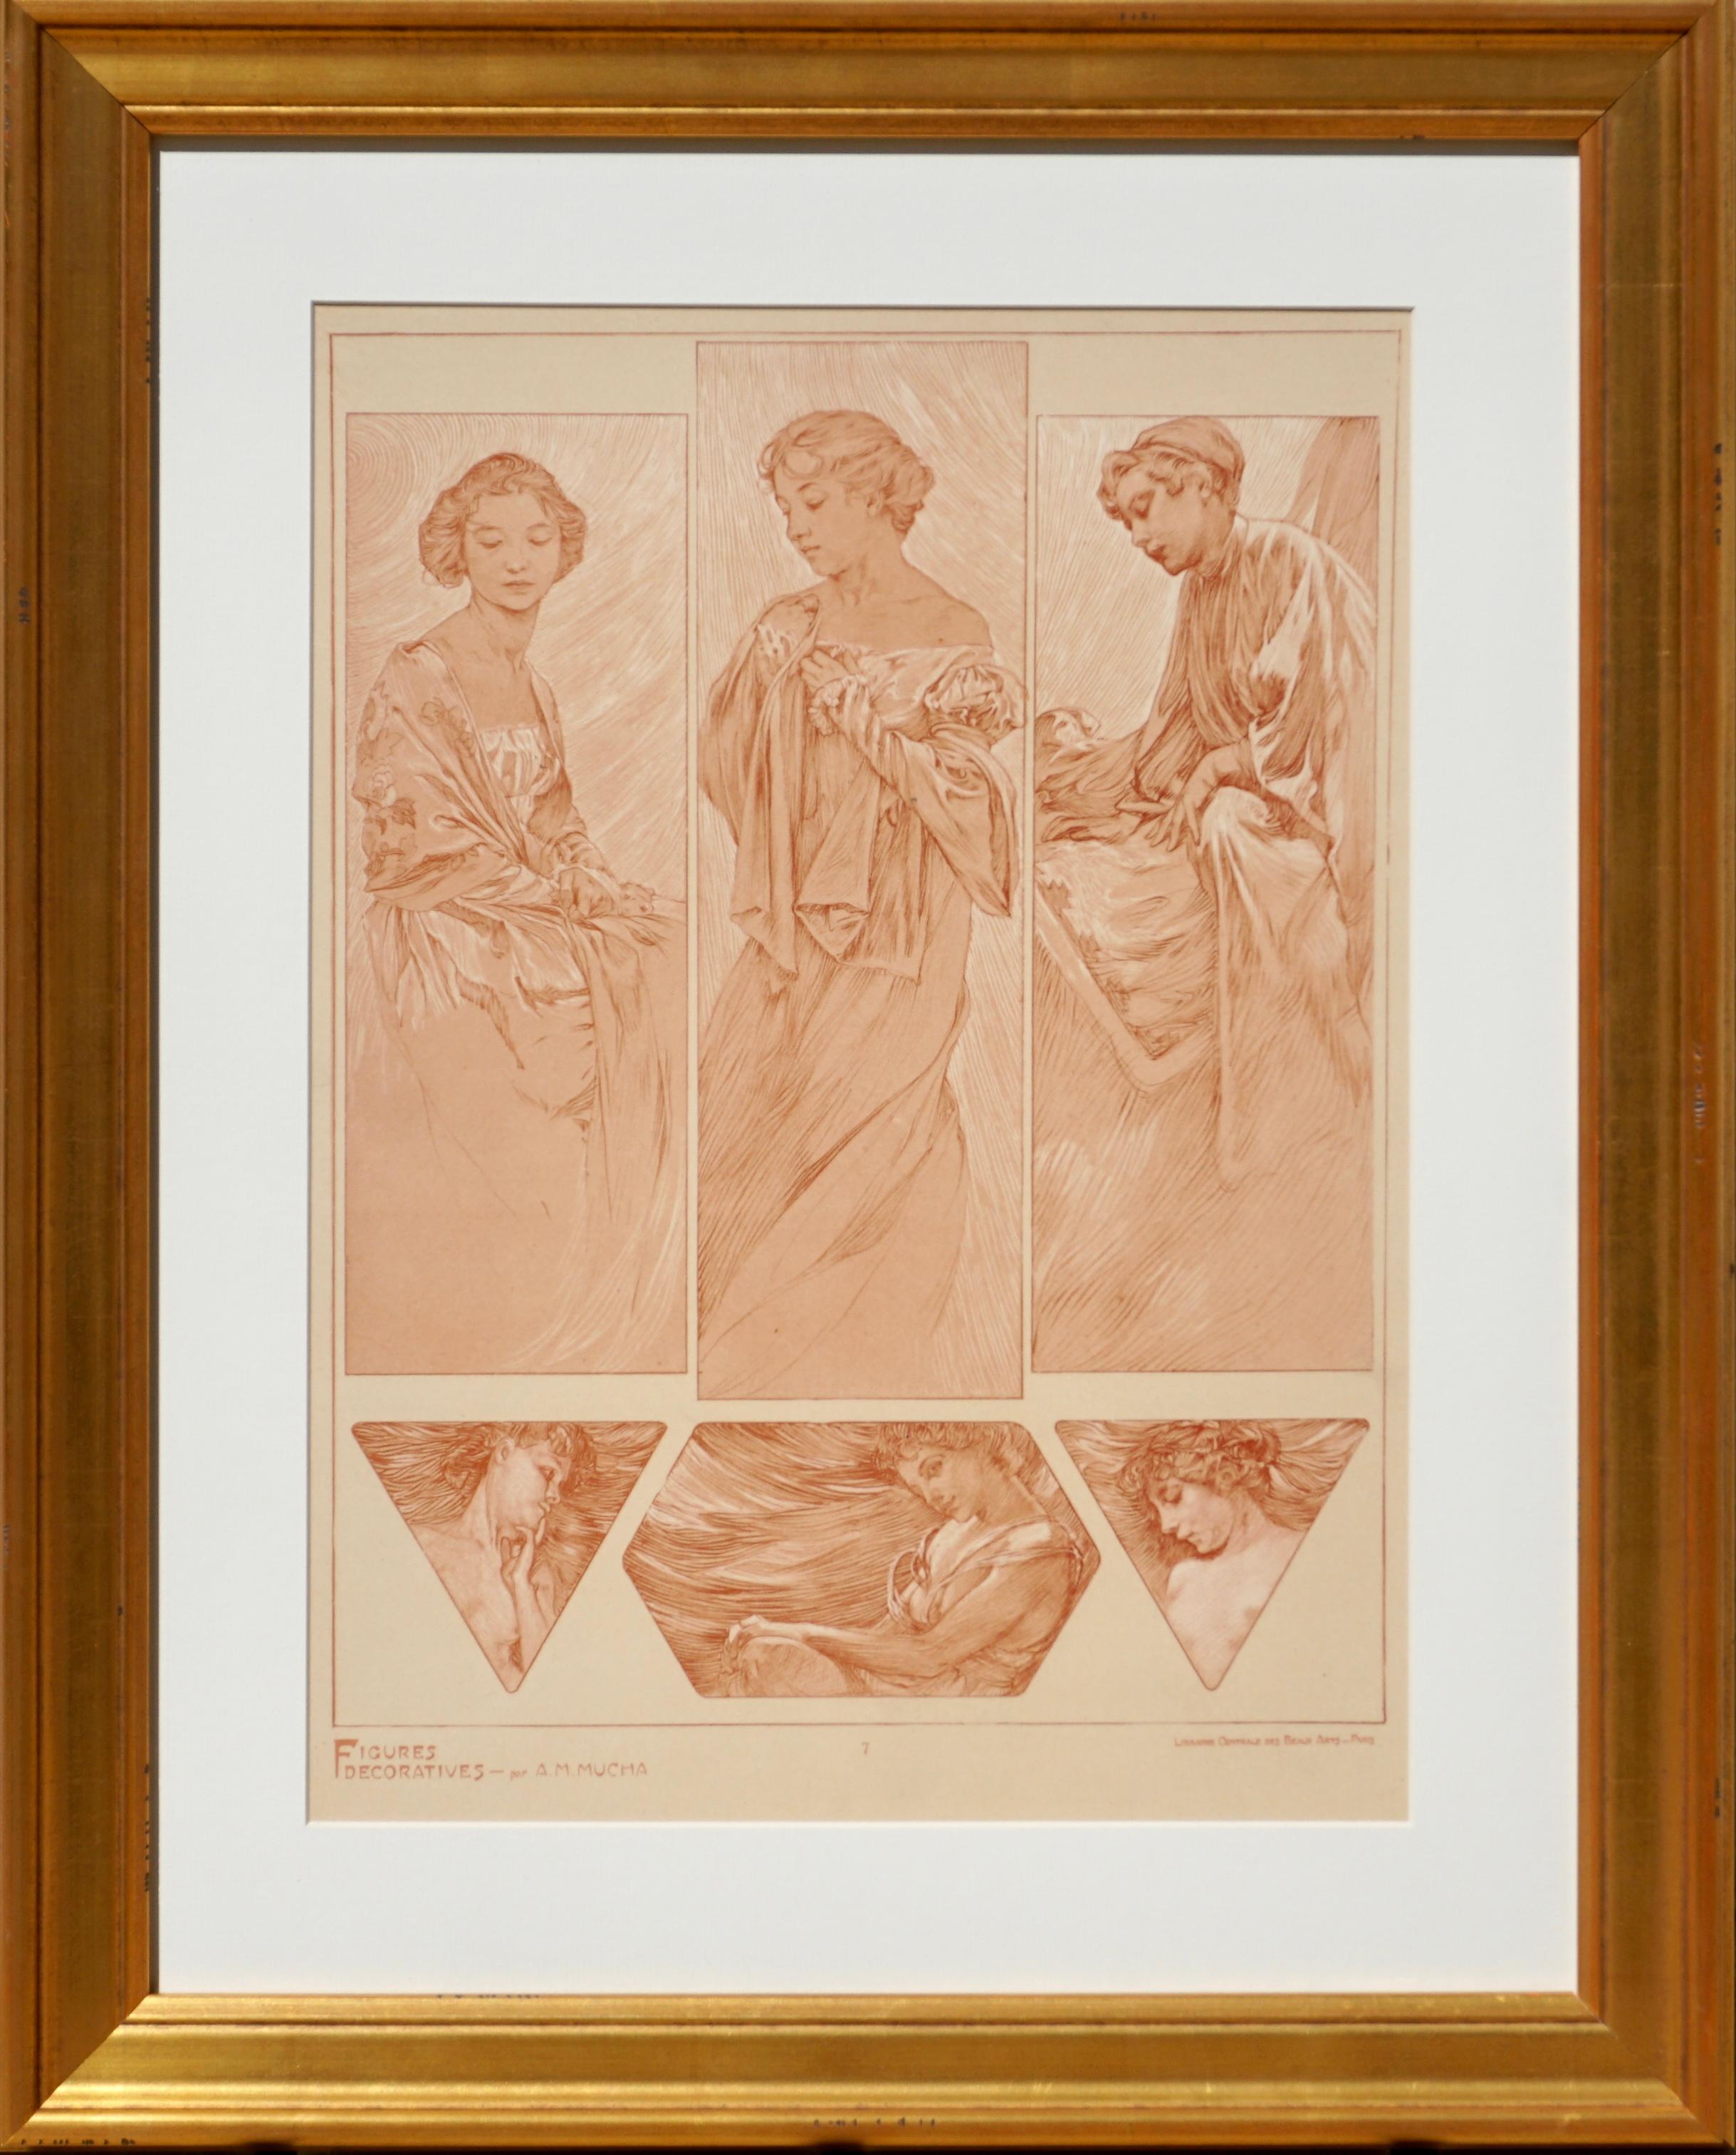 A framed Art Nouveau lithograph collotype poster by Alphone Mucha from 1905 representing the artist’s sketches of nudes, women and beautiful ladies in red umber and white pigments on vellum paper. Plate 7 of “Figures Decoratives par A. M. Mucha,”